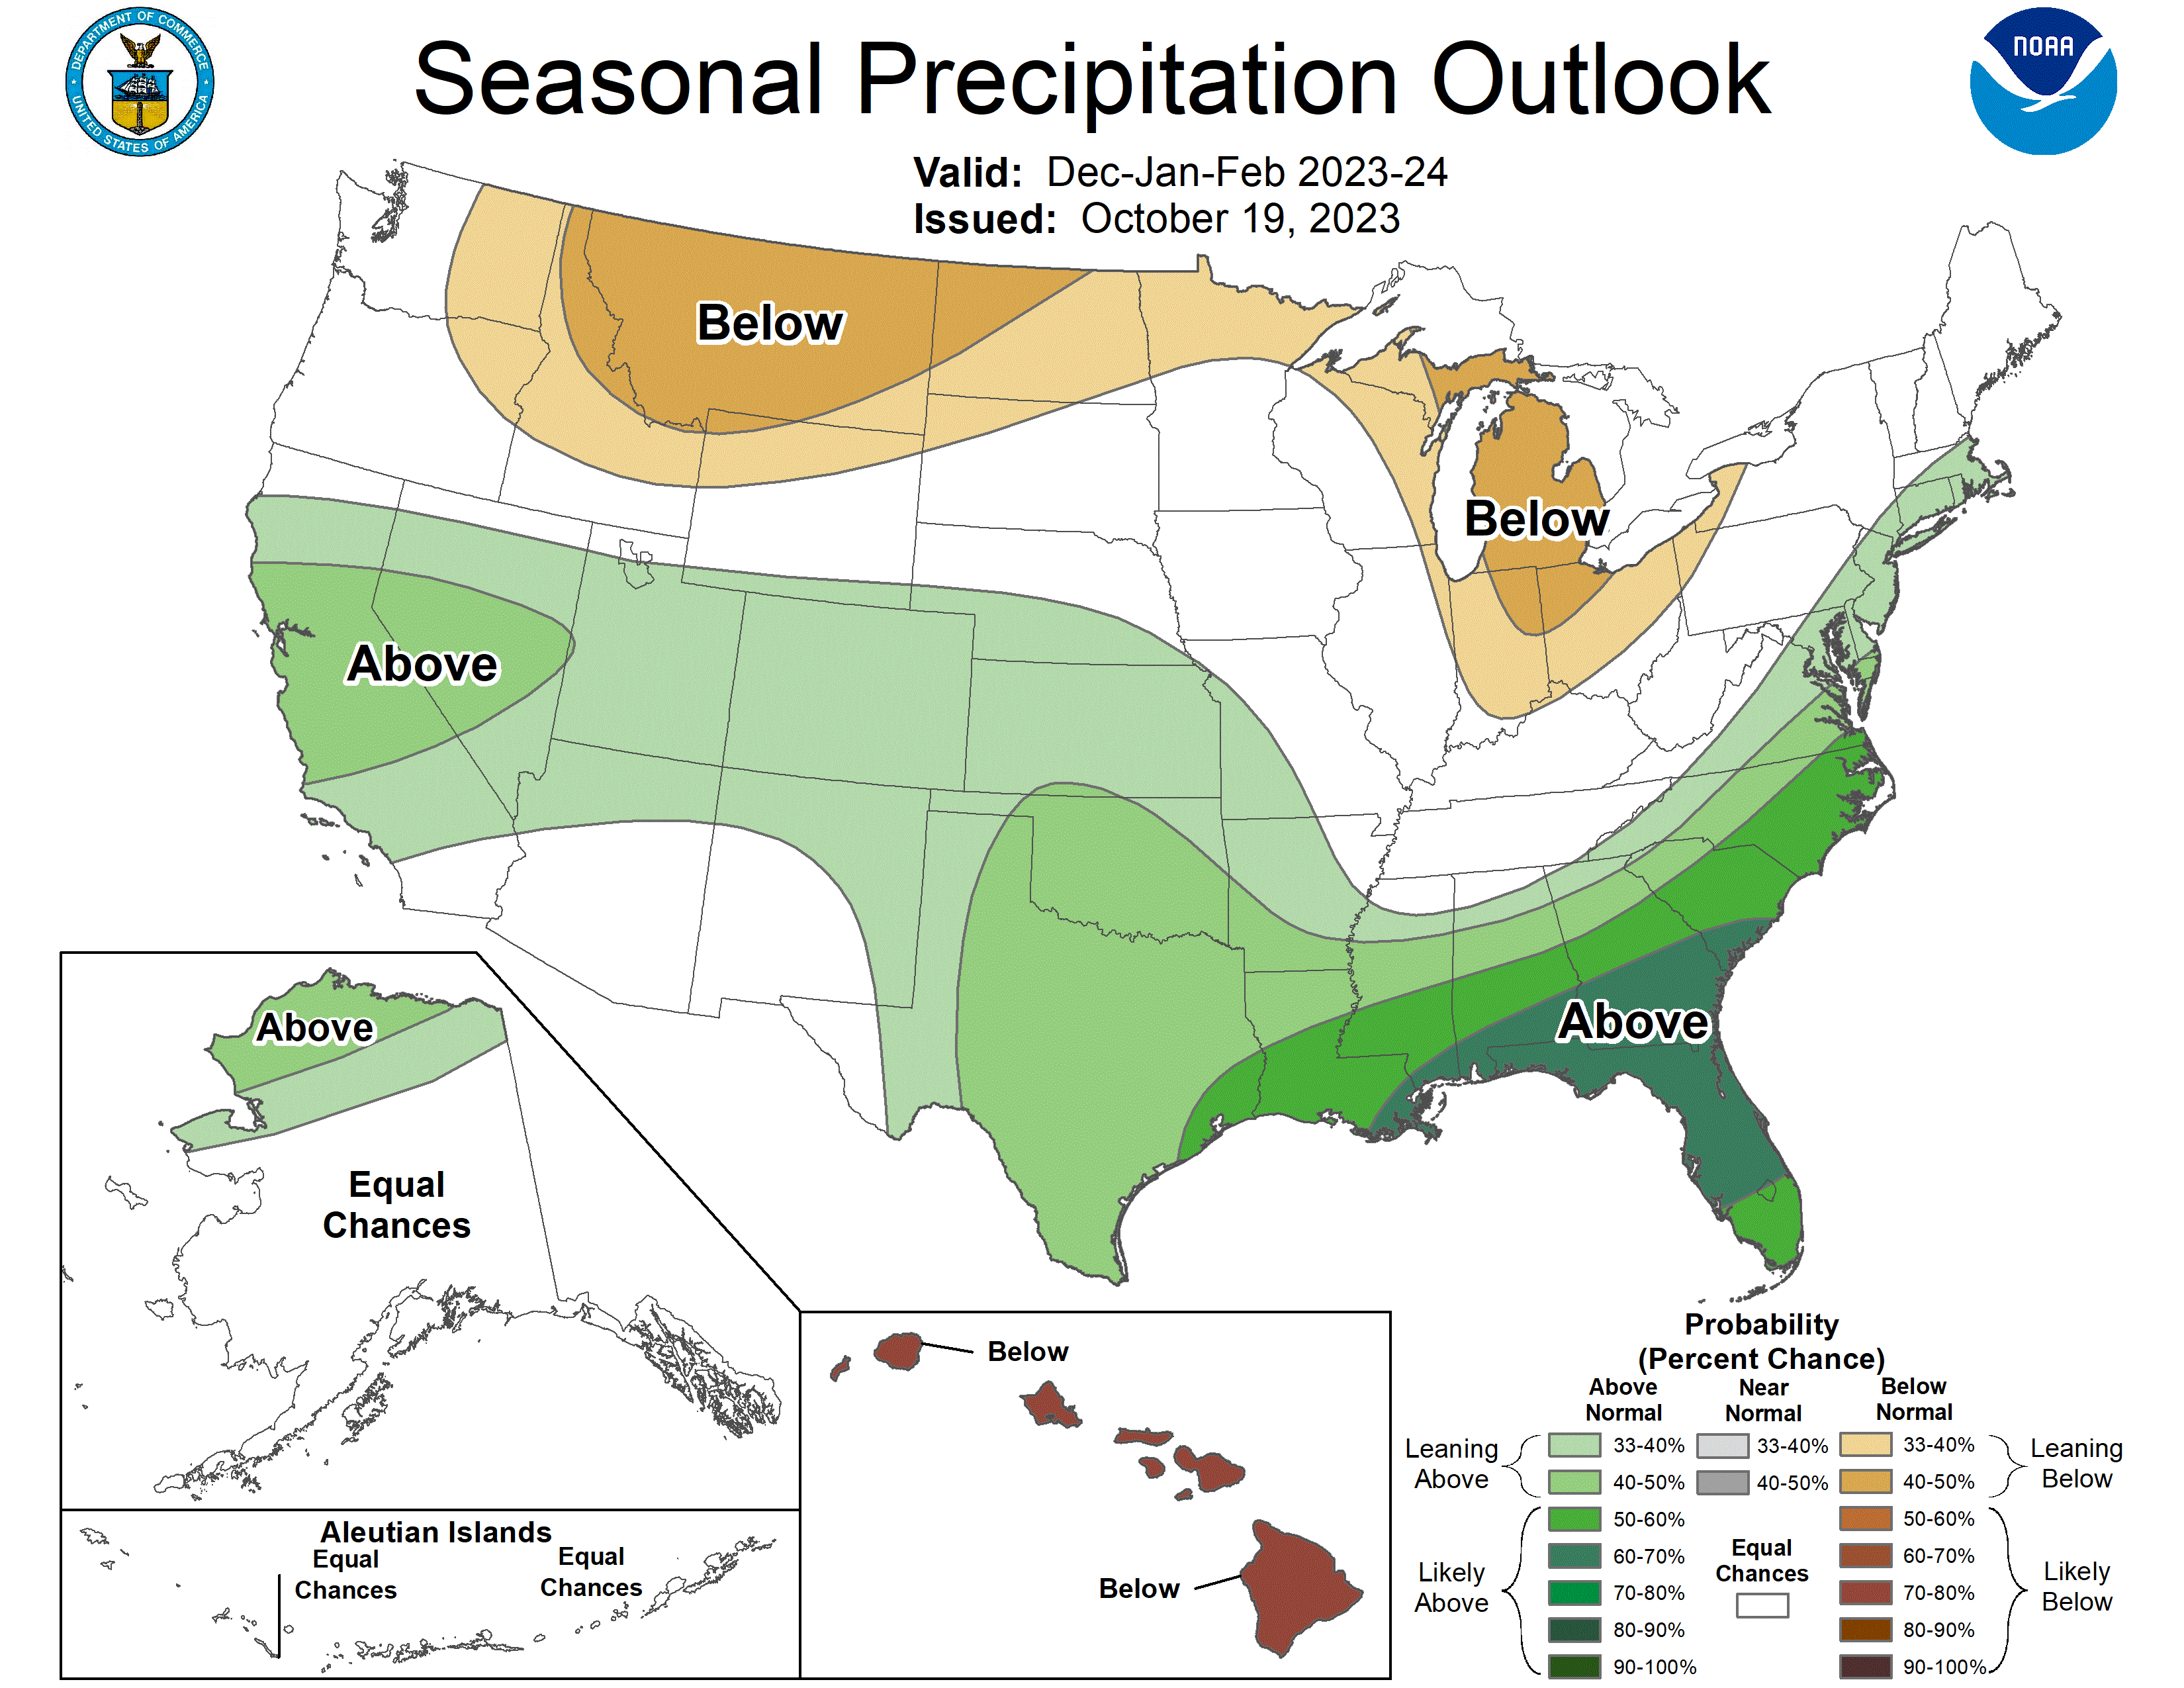 U.S. Winter Outlook: Warmer, drier South with ongoing La Nina